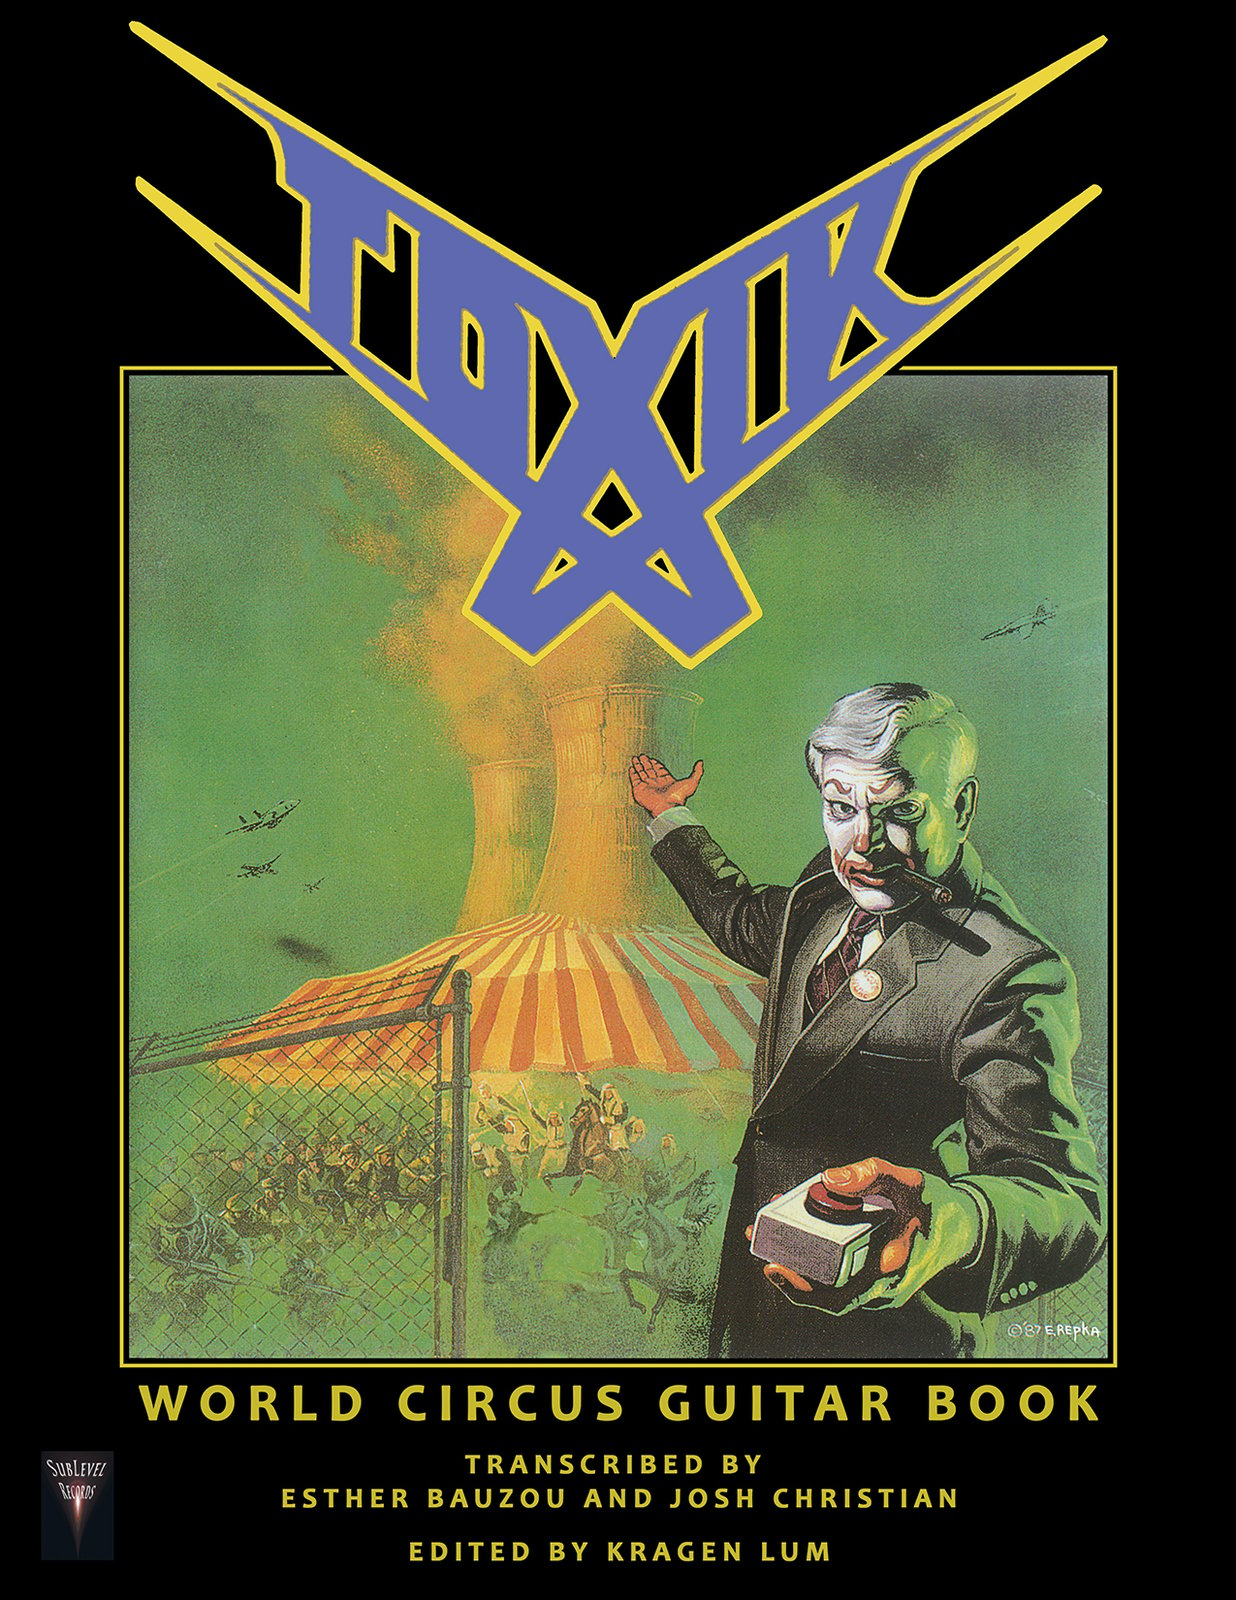 Toxik - World Circus Guitar Book (Print Edition) | SubLevel Records